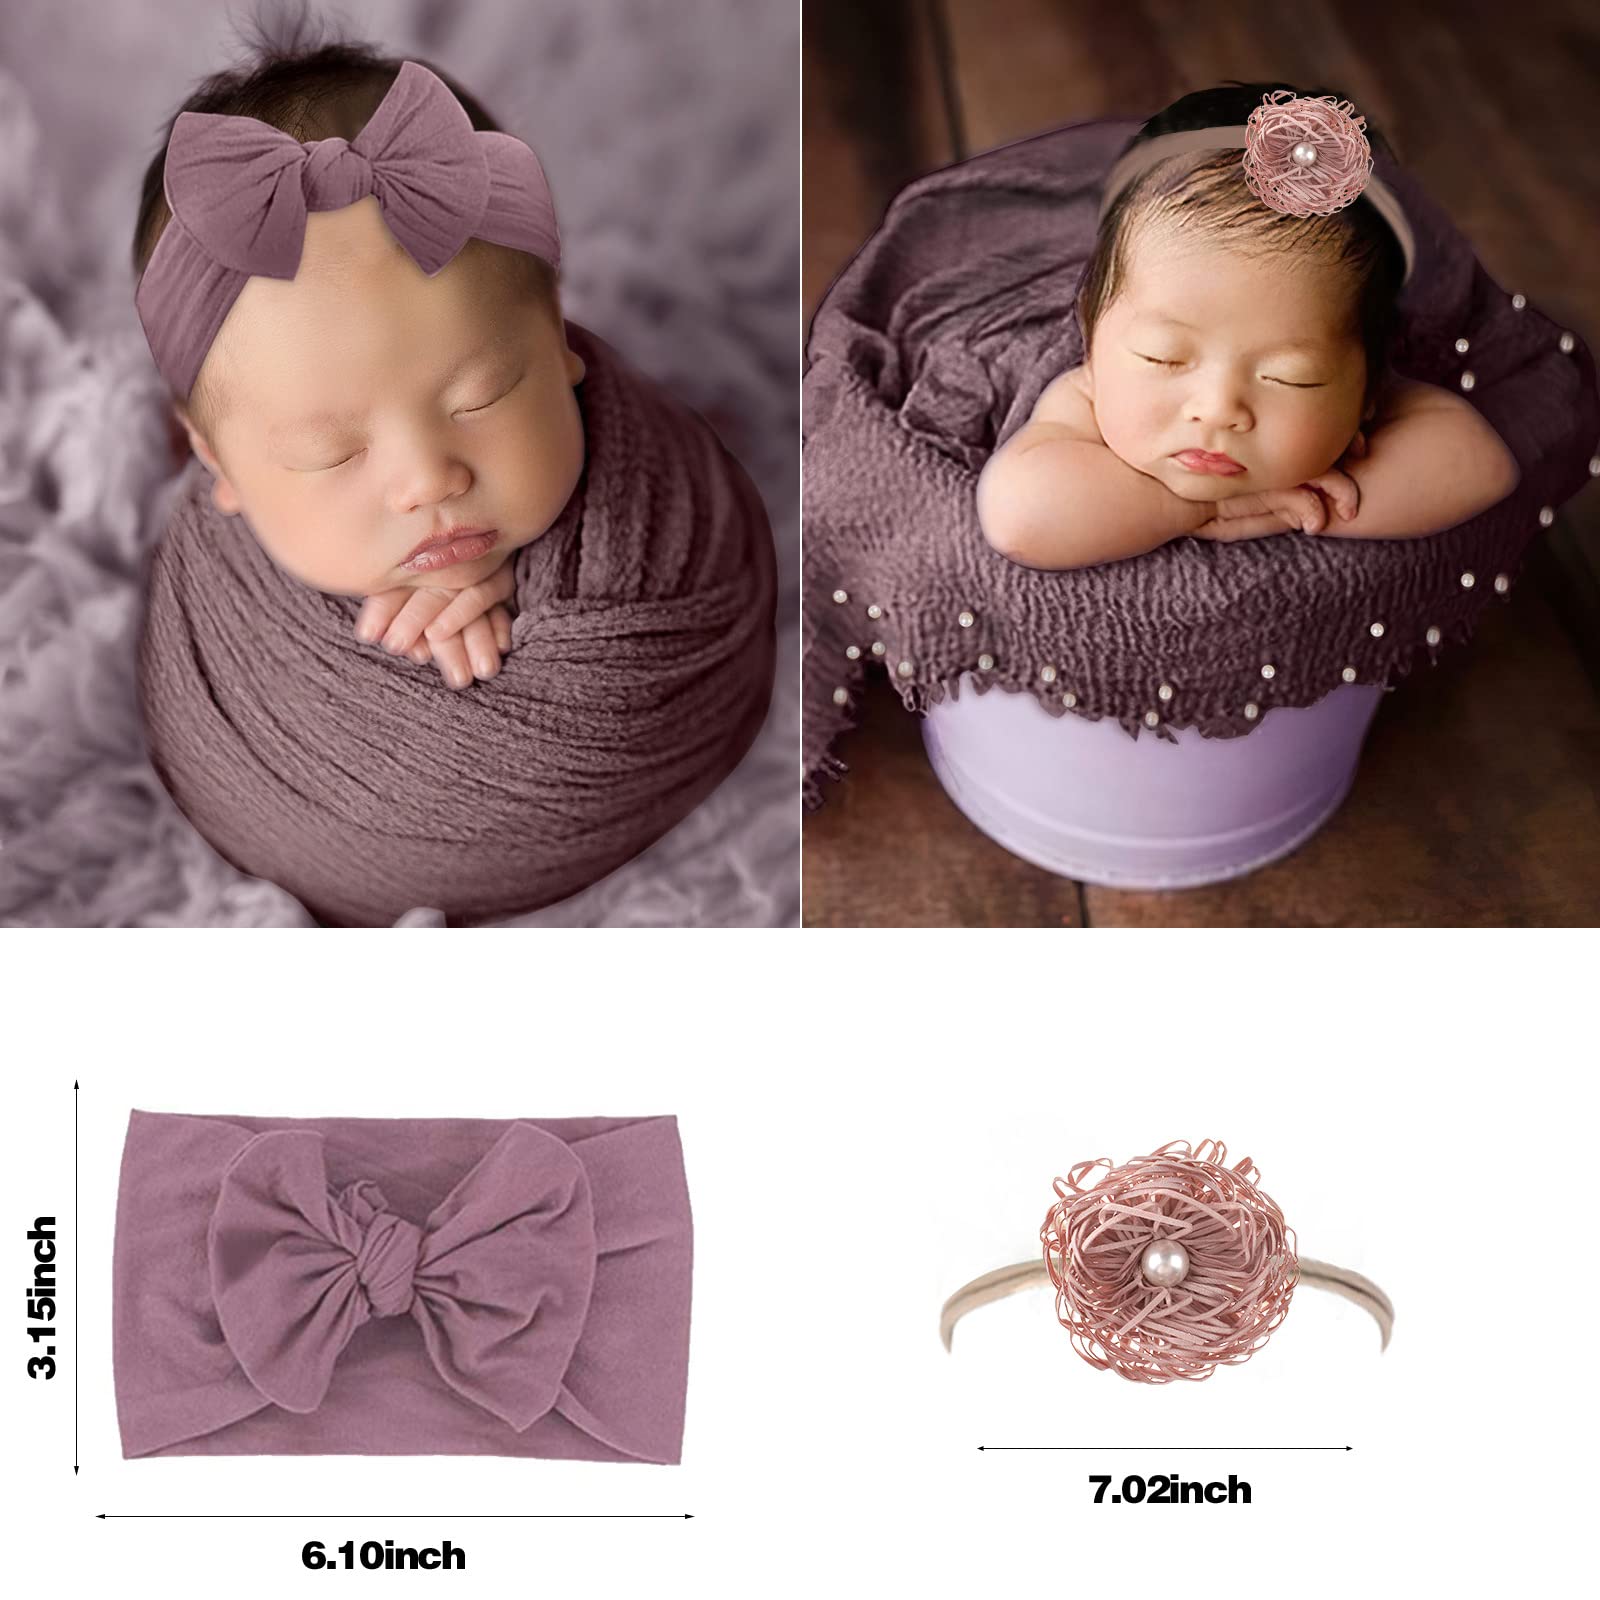 AOKE 5 PCS Newborn Photography Wrap Props Kit, Newborn Photo Props Long Ripple Wraps DIY Blanket with Flower Headbands, Purple Toddler Baby Photography Props Mat Set for Baby Boys and Girls